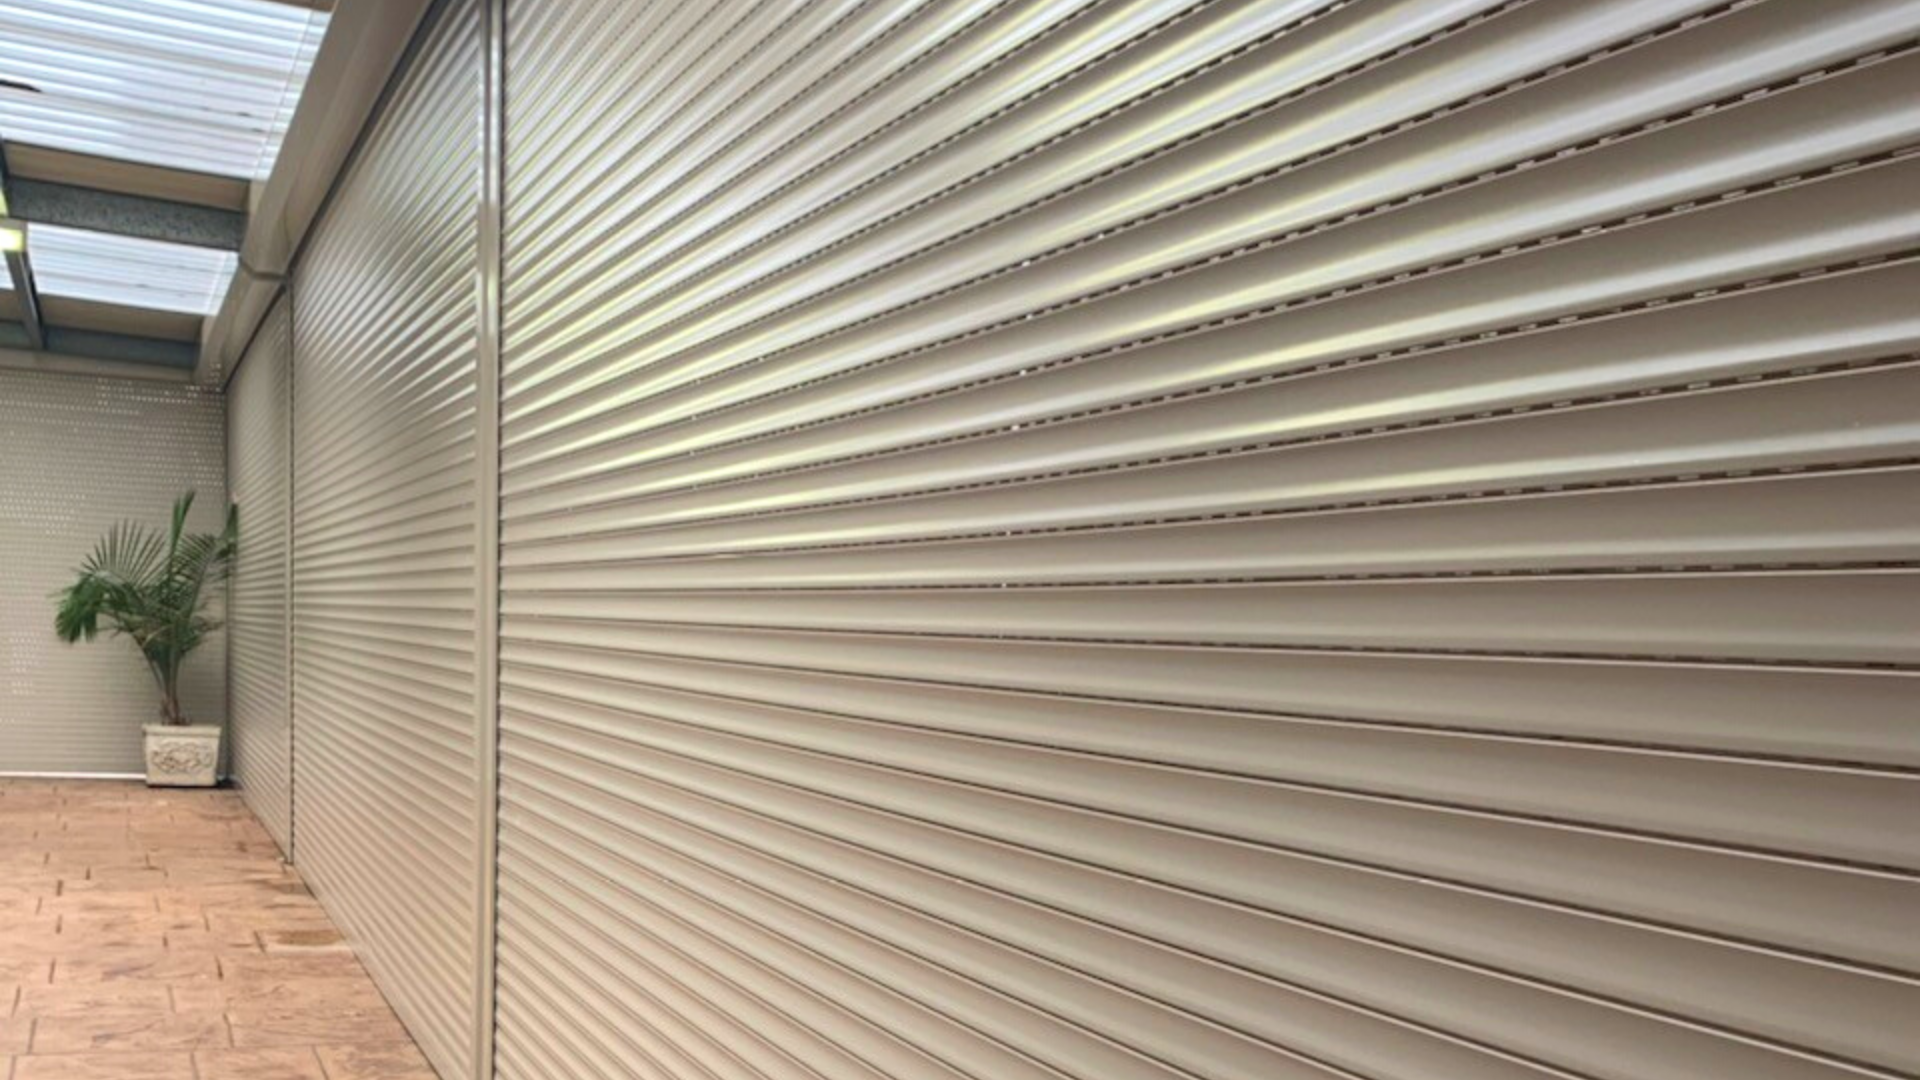 Aluminium has become the preferred material for durable roller shutters